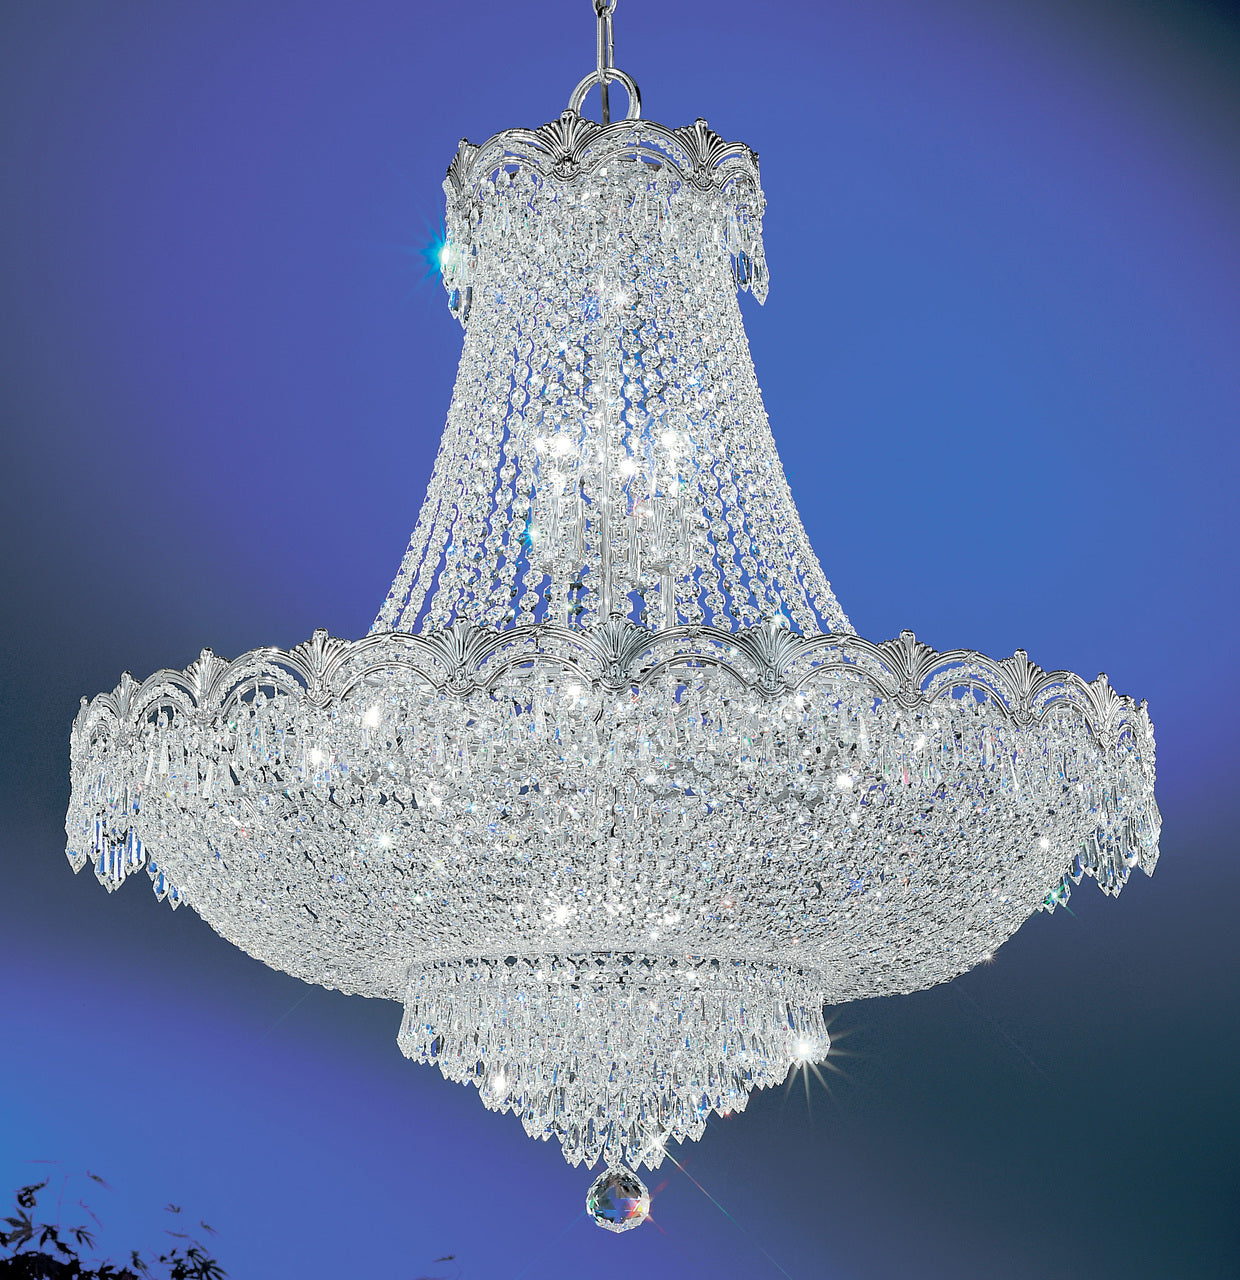 Classic Lighting 1858 CHB S Regency II Crystal Chandelier in Chrome/Black Patina (Imported from Spain)